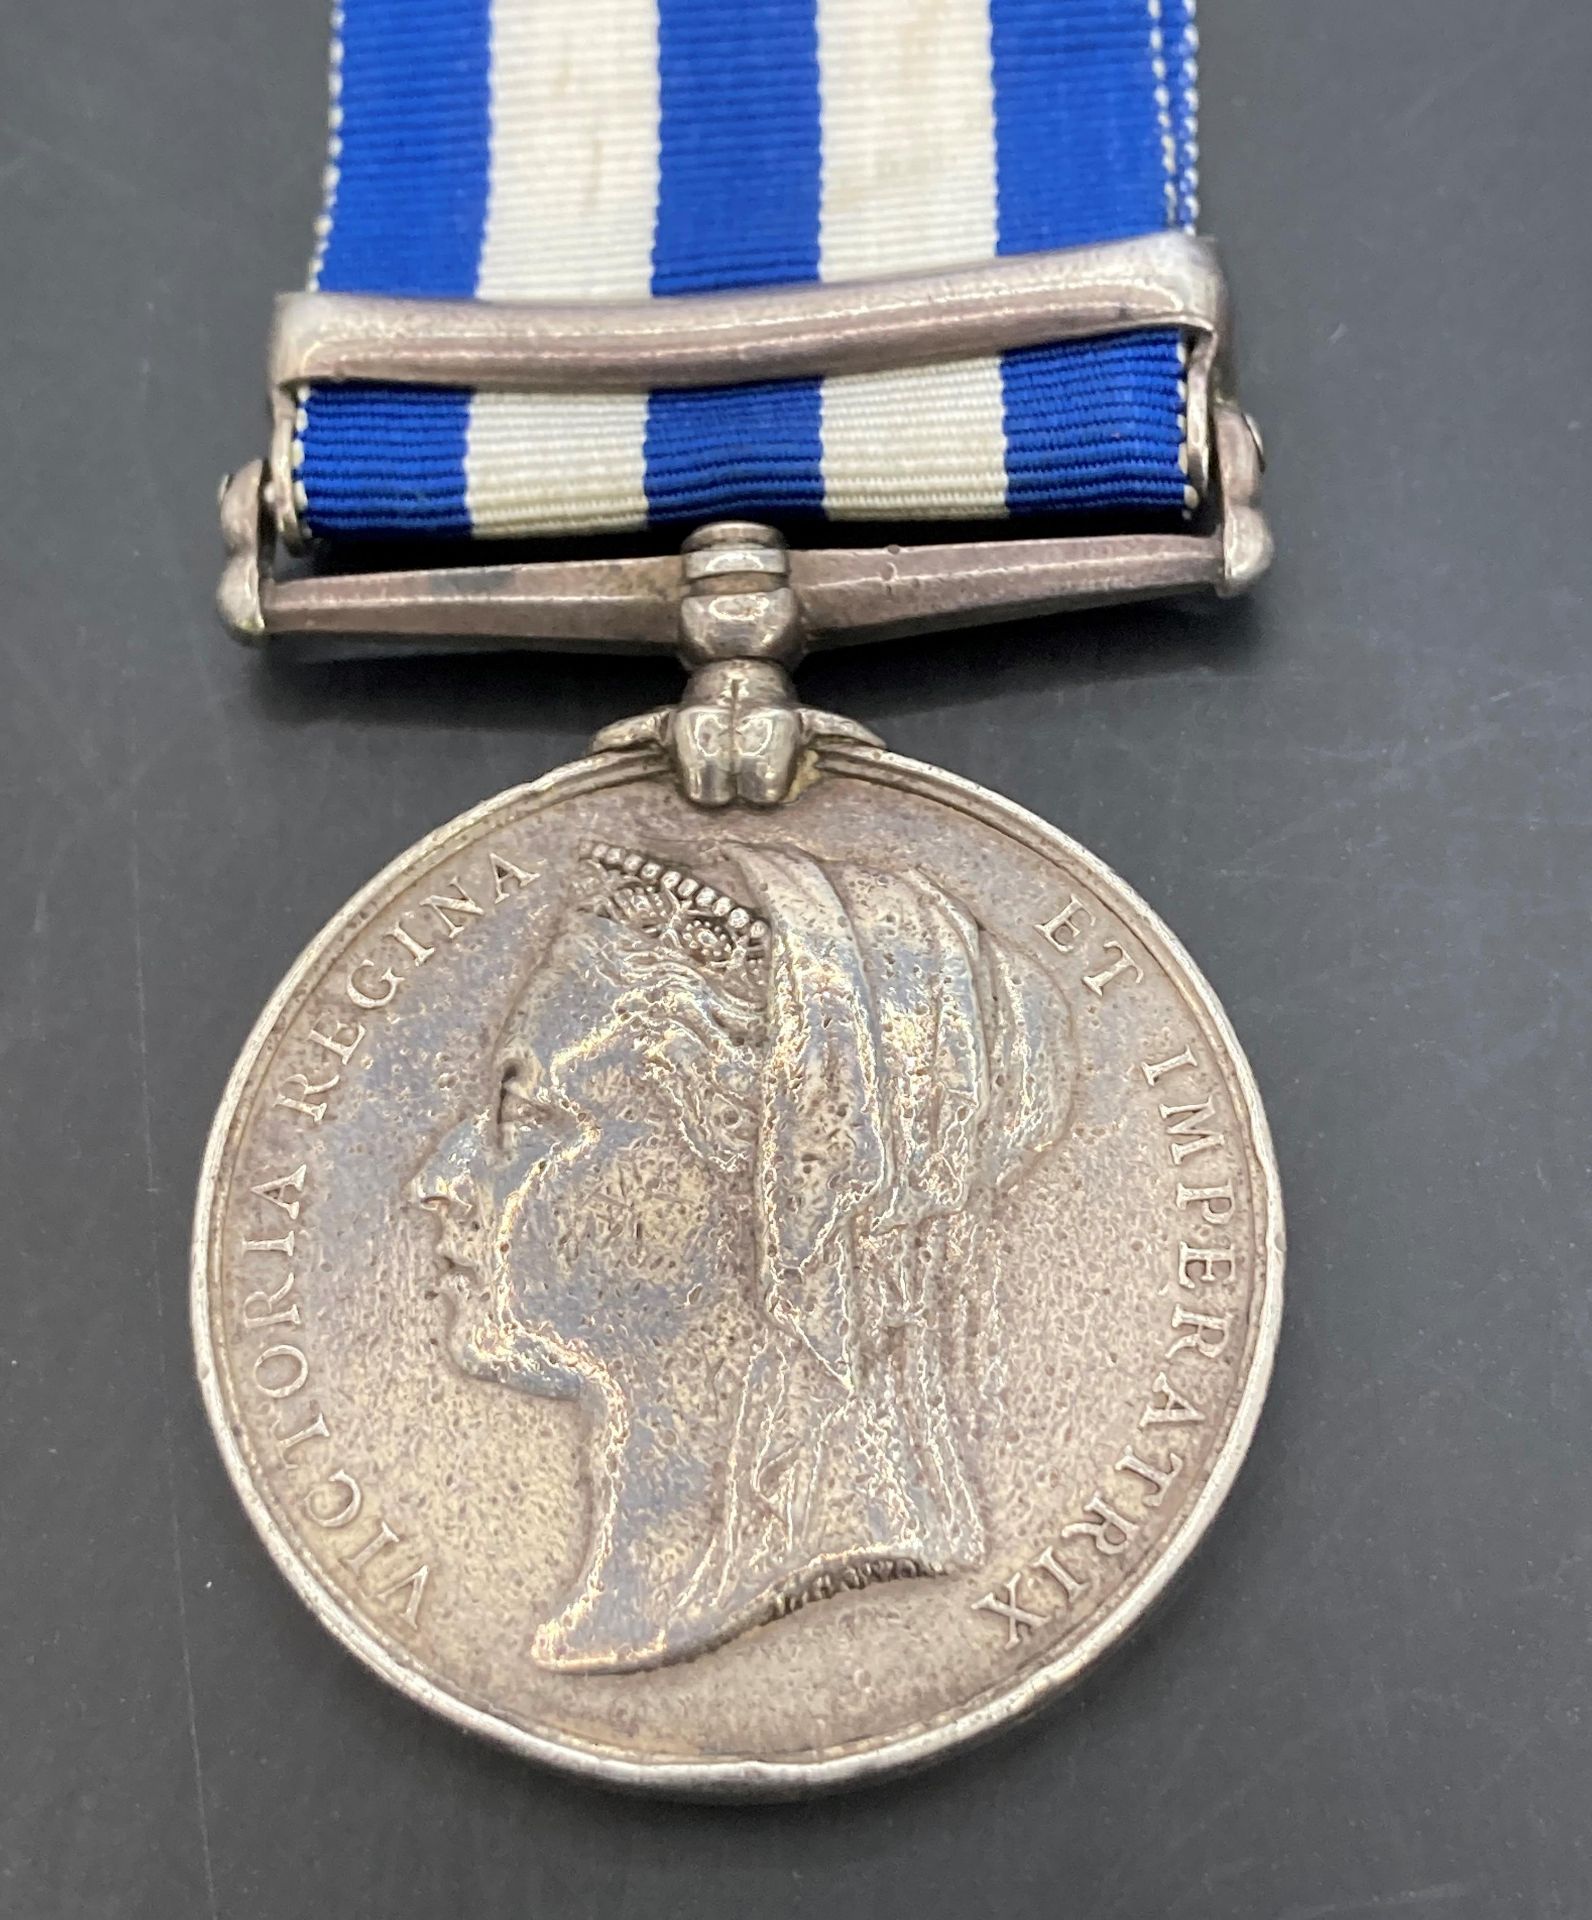 Egypt 1884 Medal with clasp The Nile 1884-85 and ribbon named to 873 Pte D Young Cam'n Highs - Image 2 of 3